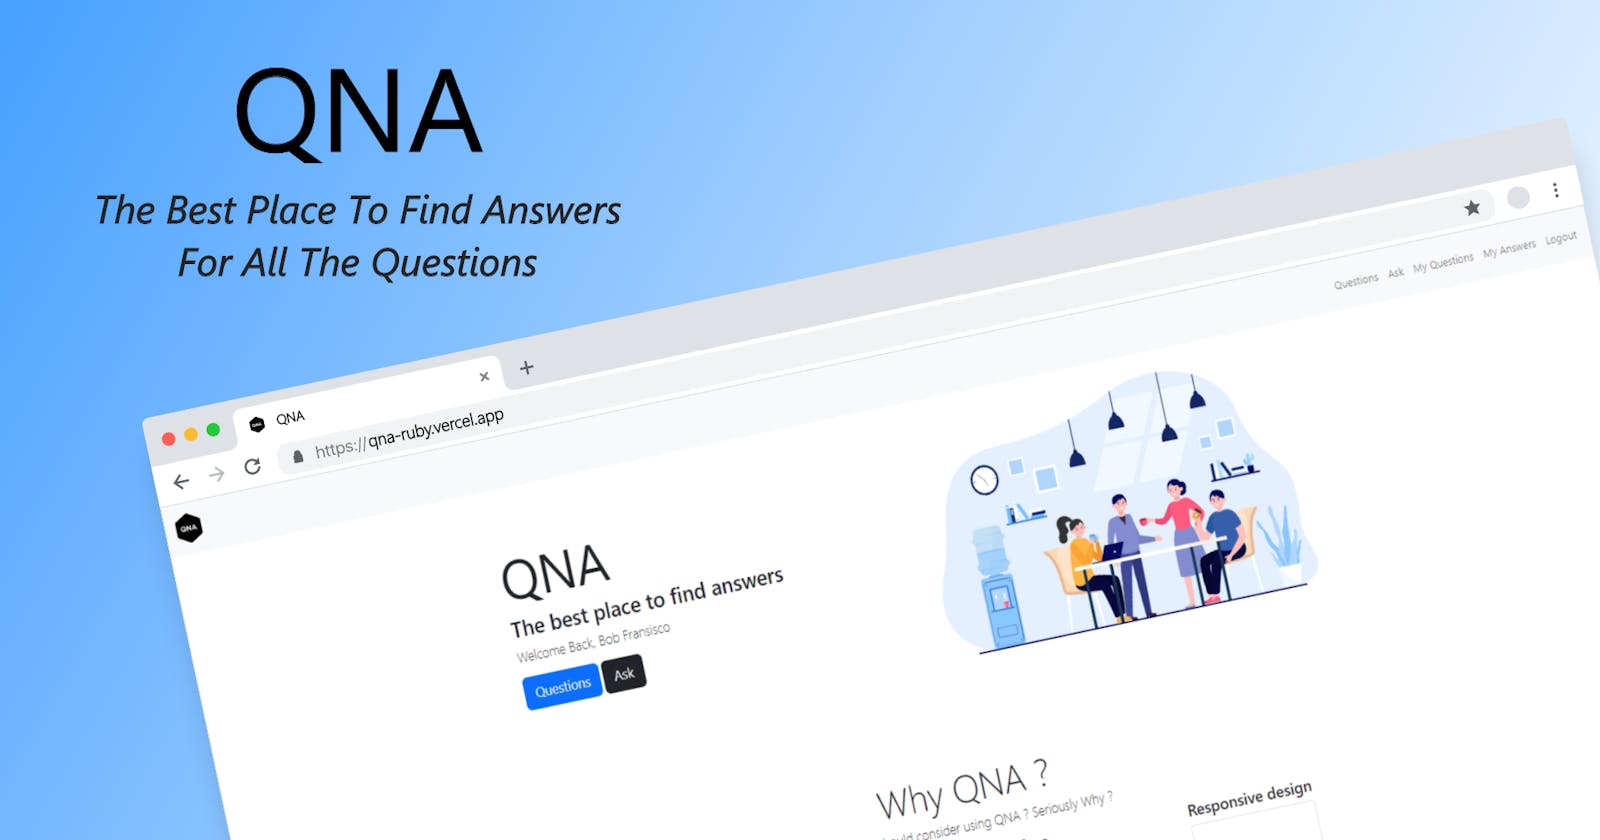 Introducing QNA - The best place to find answers to all the questions ⭐